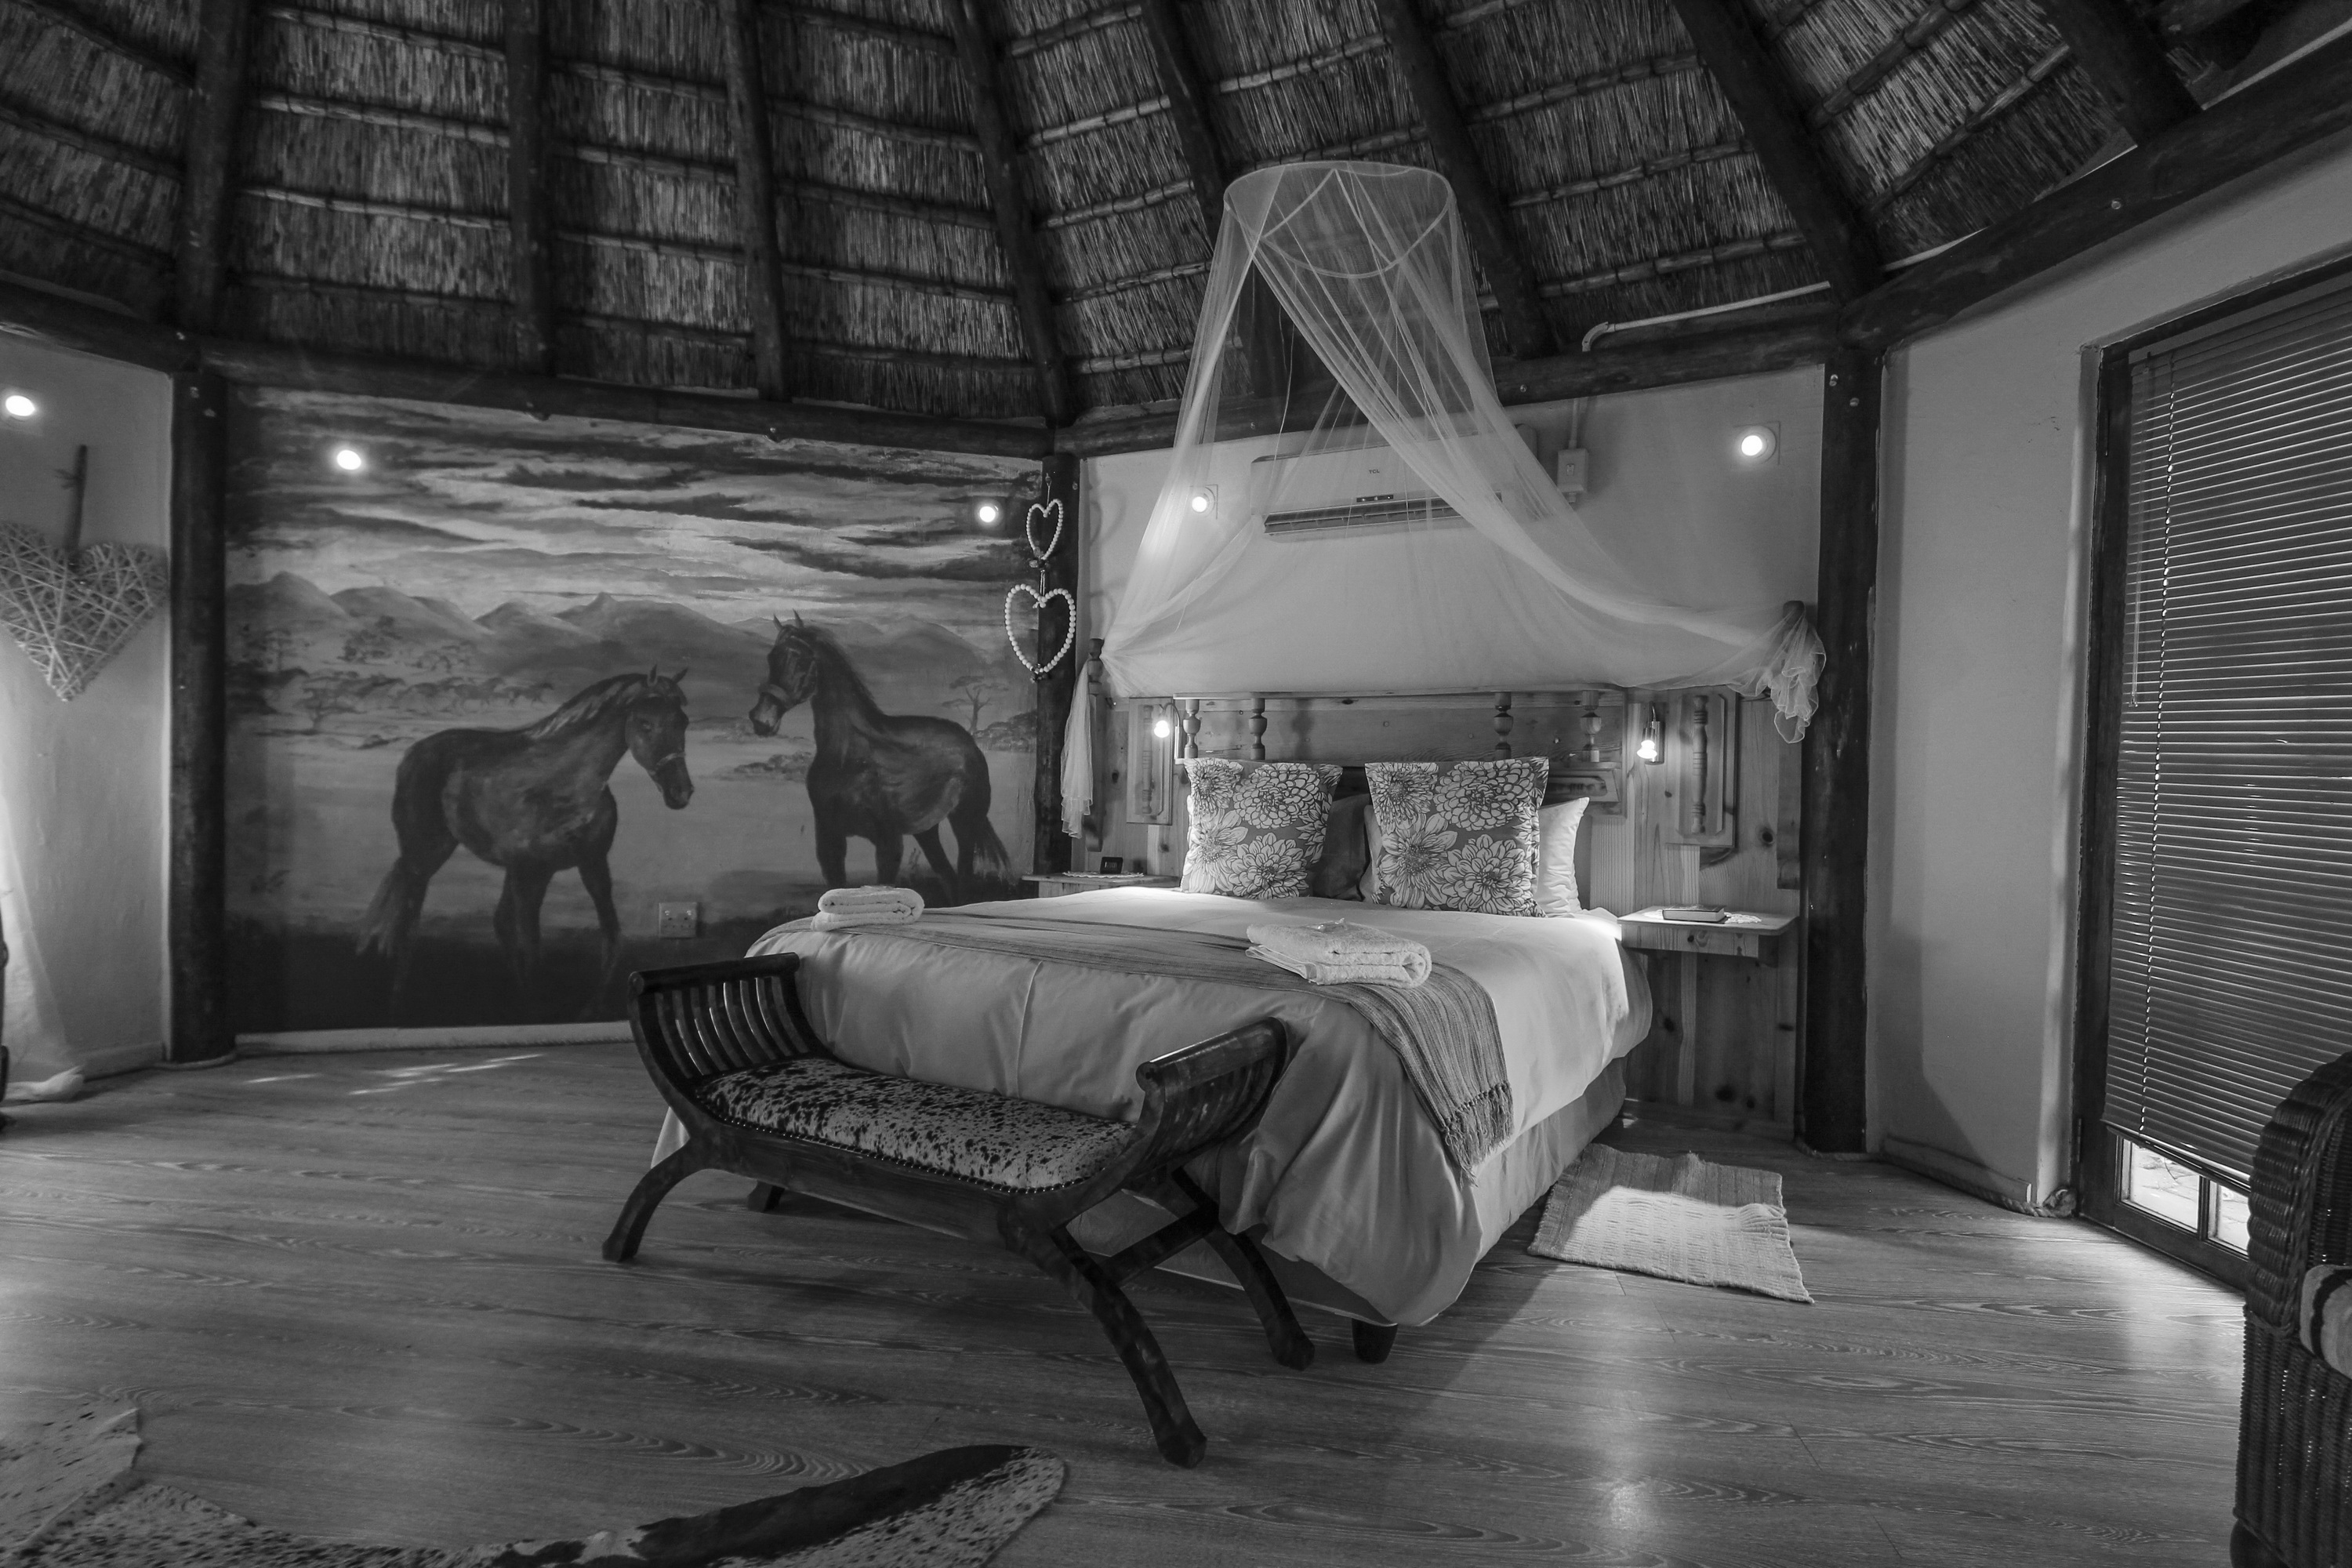 The horse theme is picked up in one of the Morning Glory guest cottages. Image: Chris Marais 